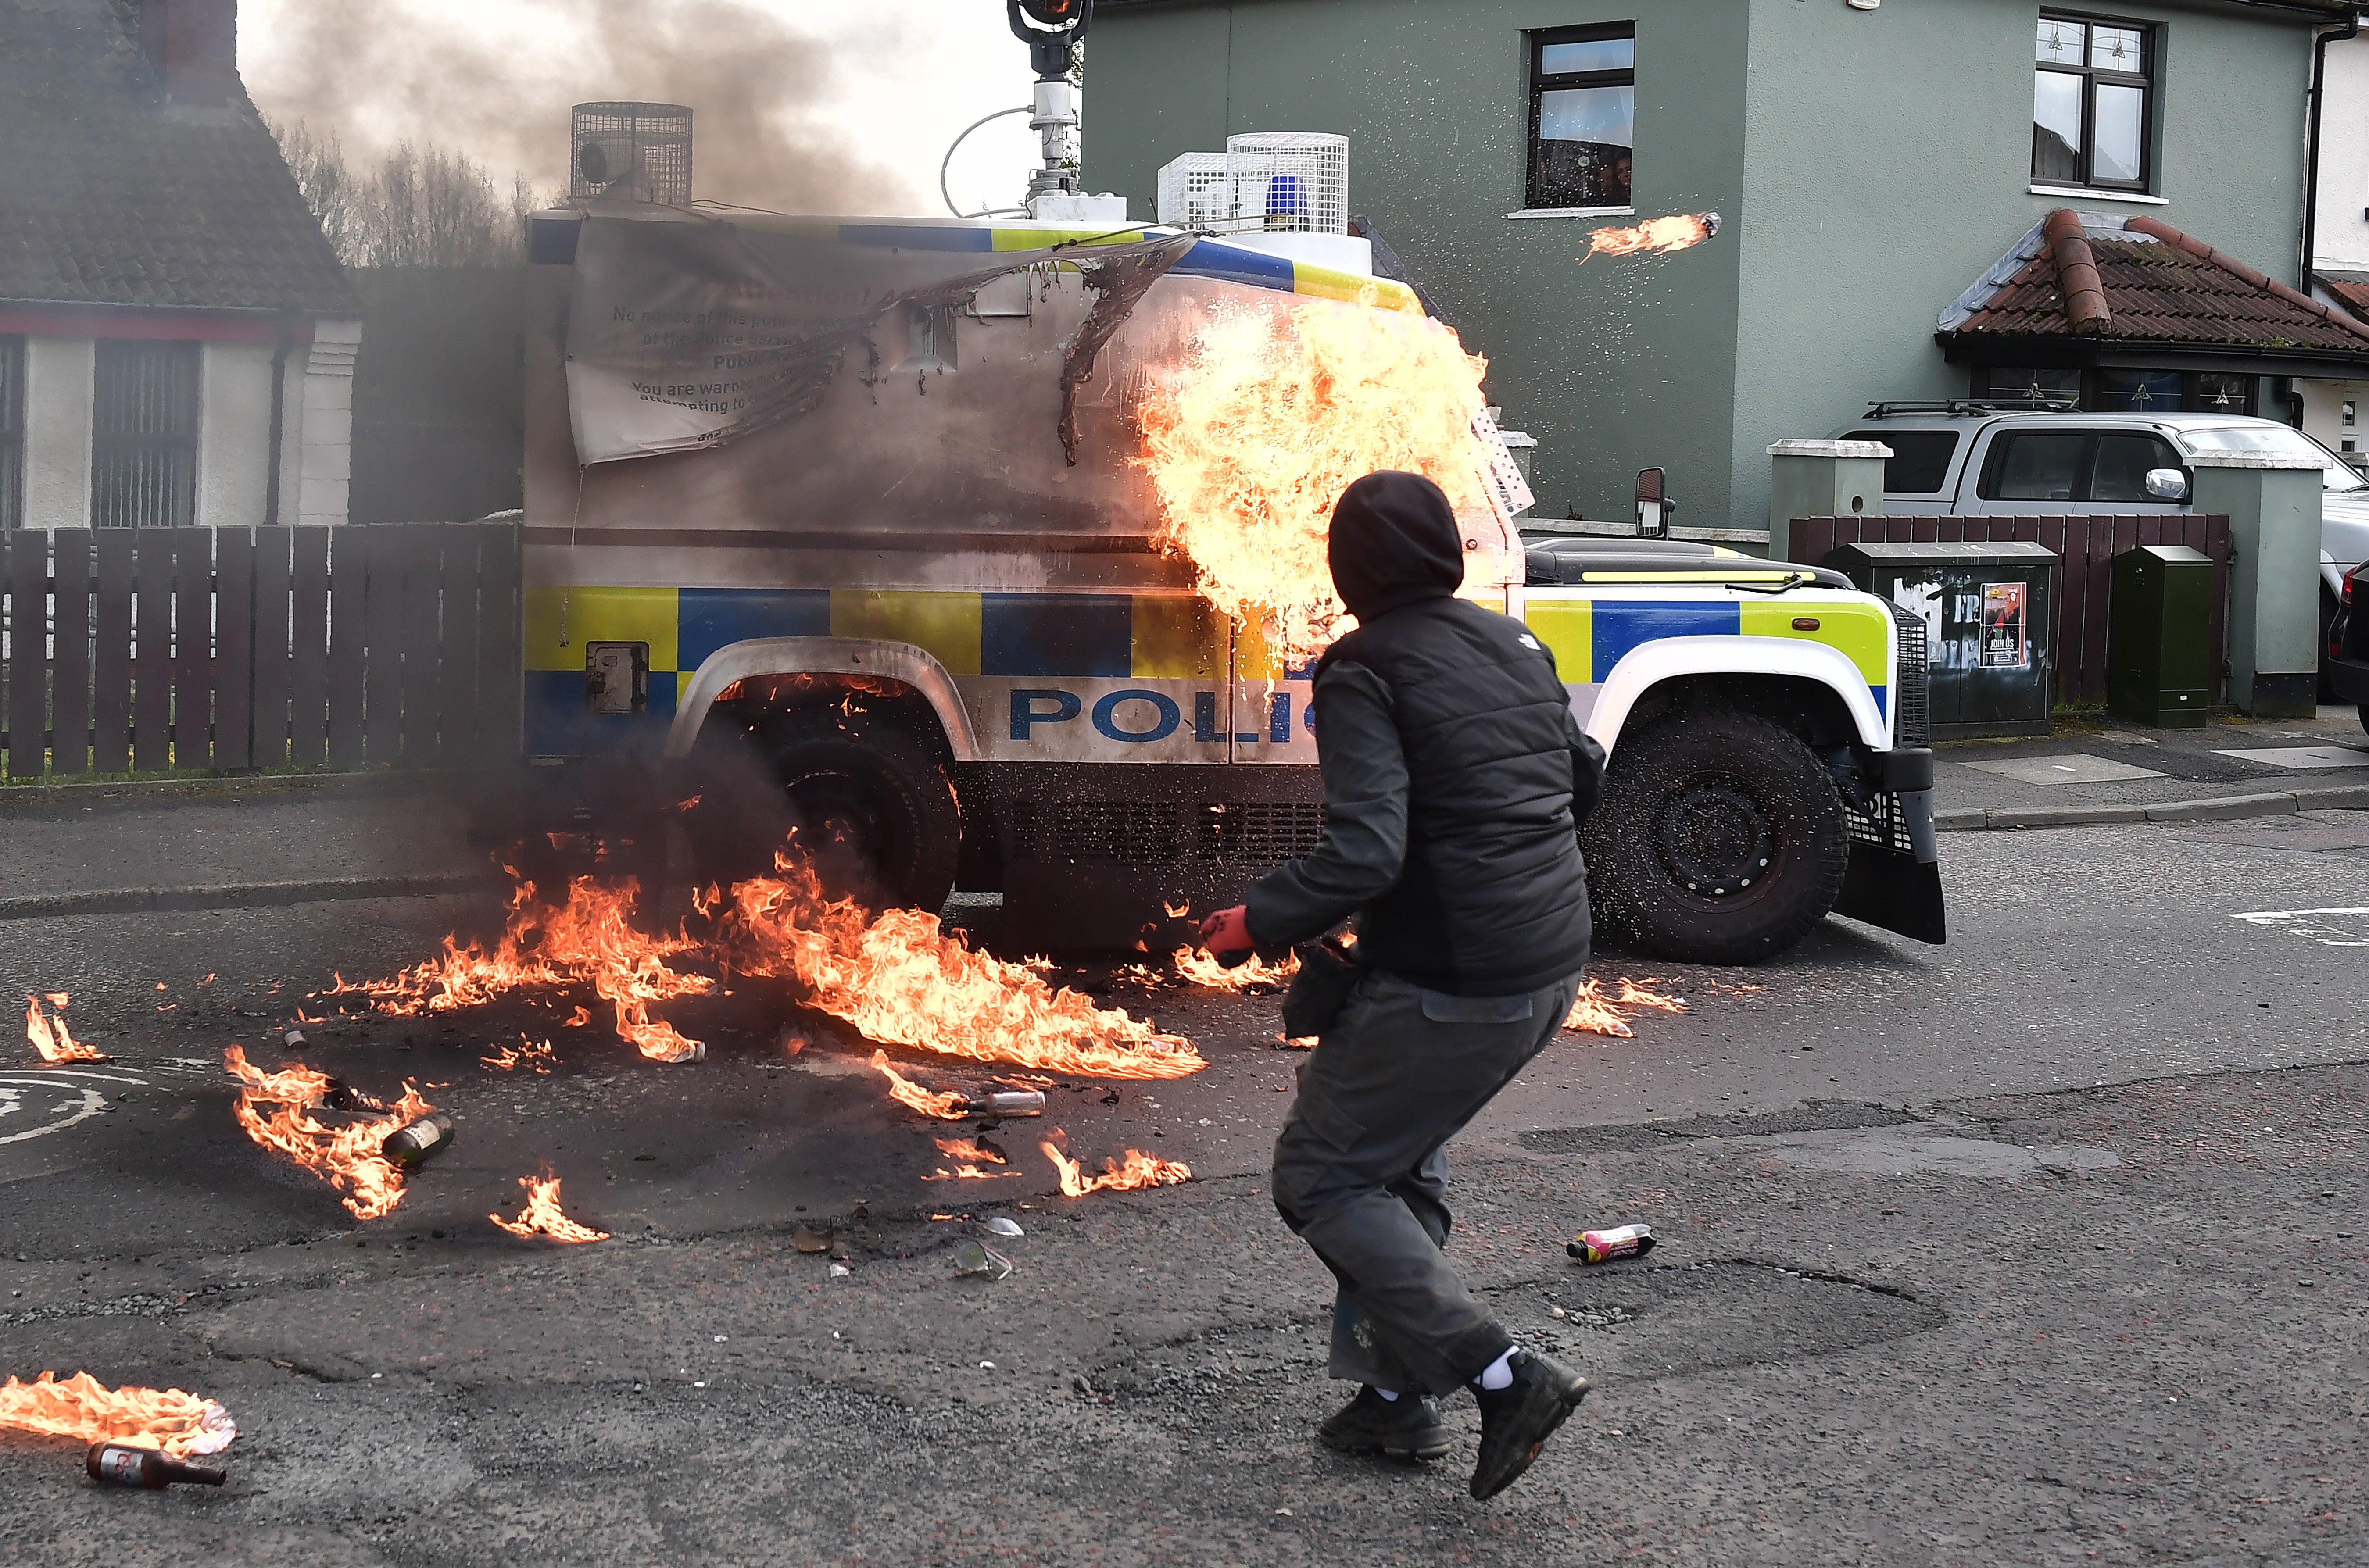 The clashes have taken place on the 25th anniversary of the Good Friday Agreement